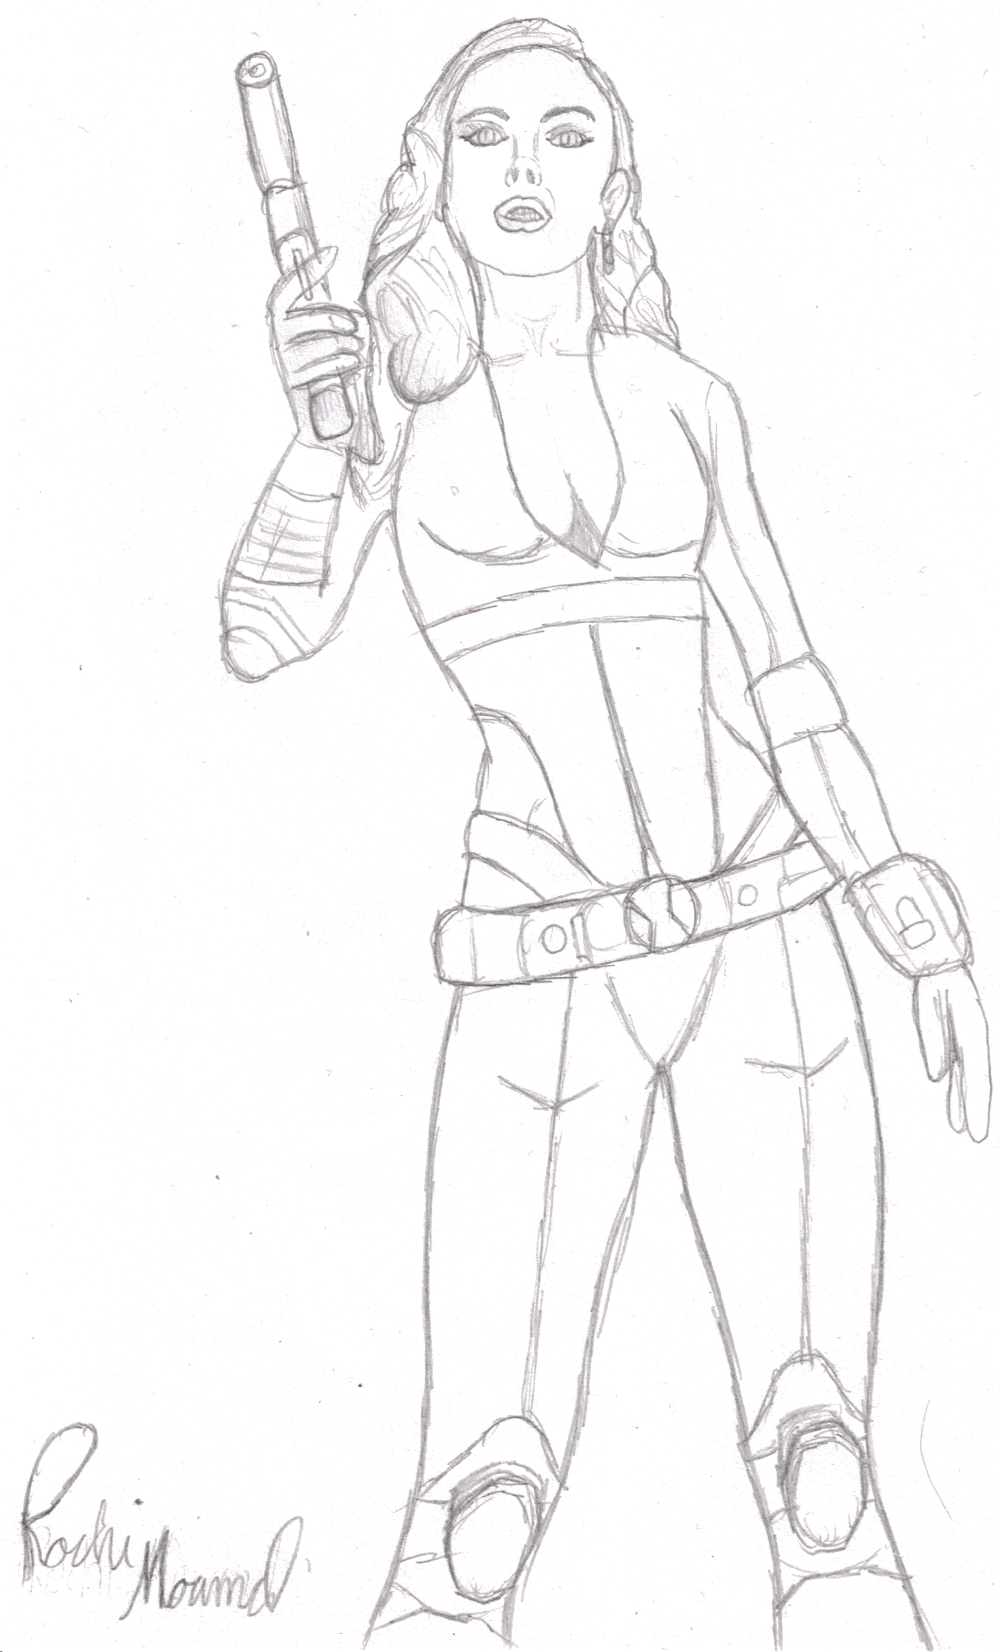 The story of Black Widow – Learning to draw